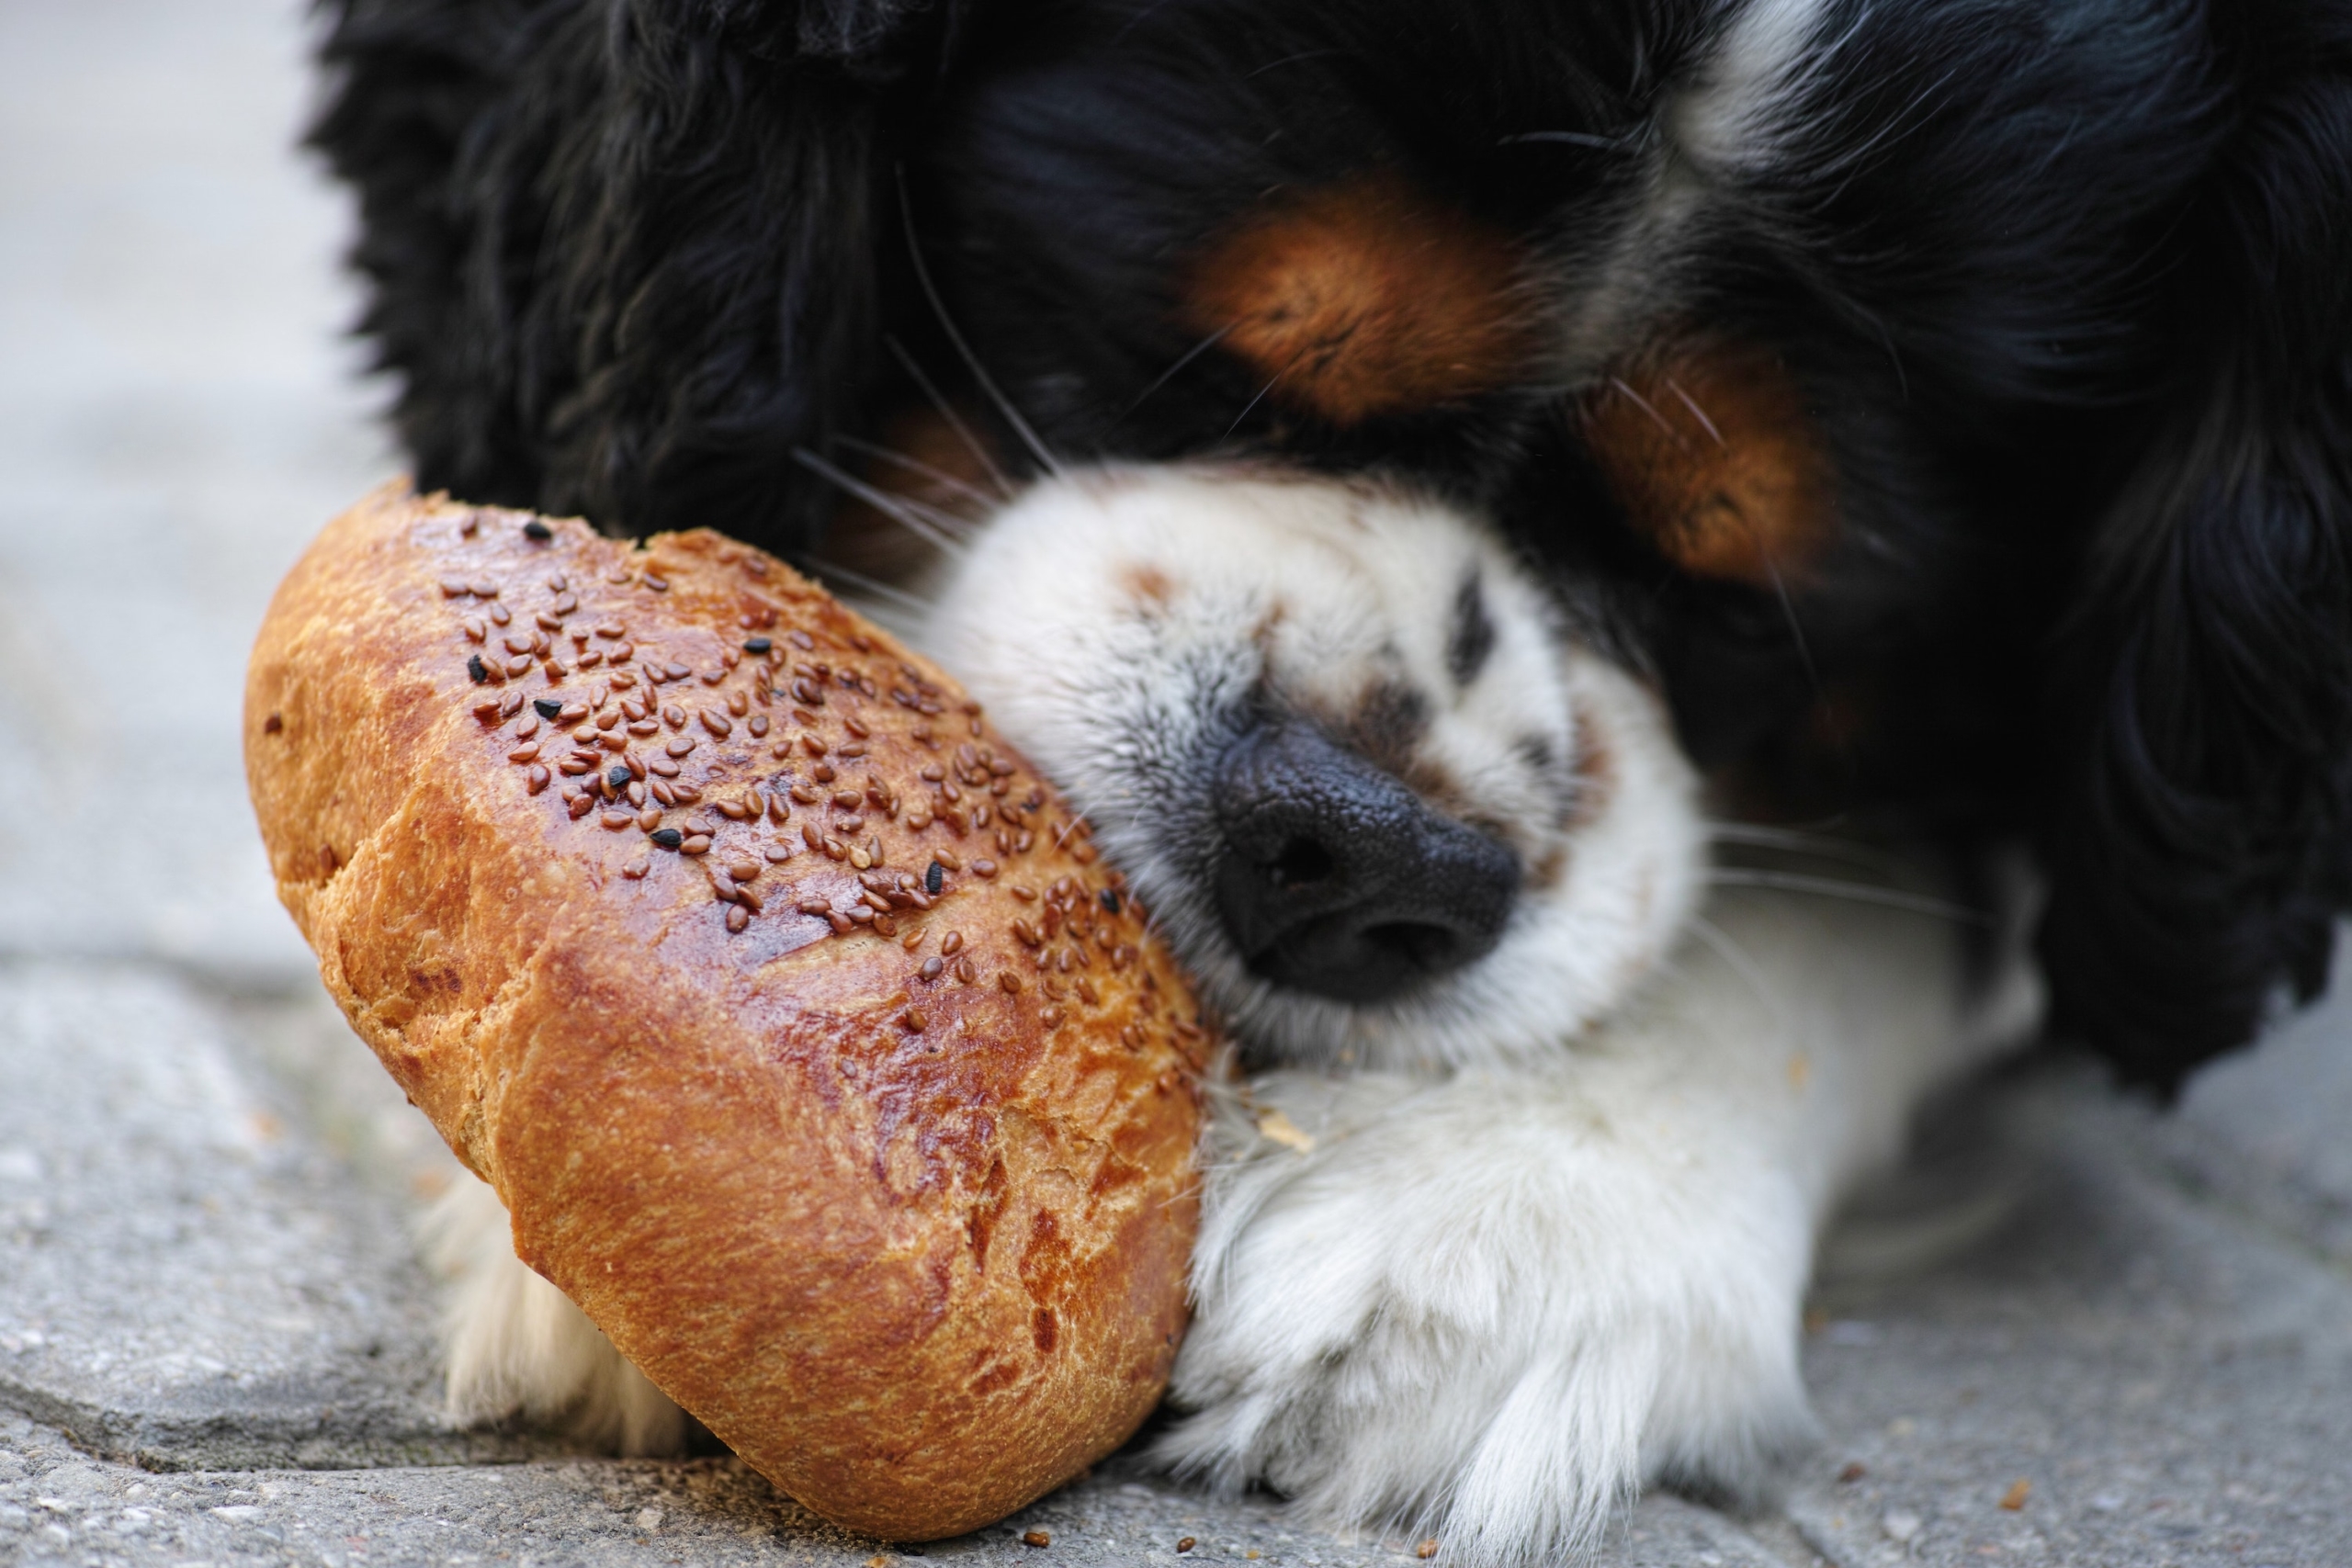 can dogs eat nut bread